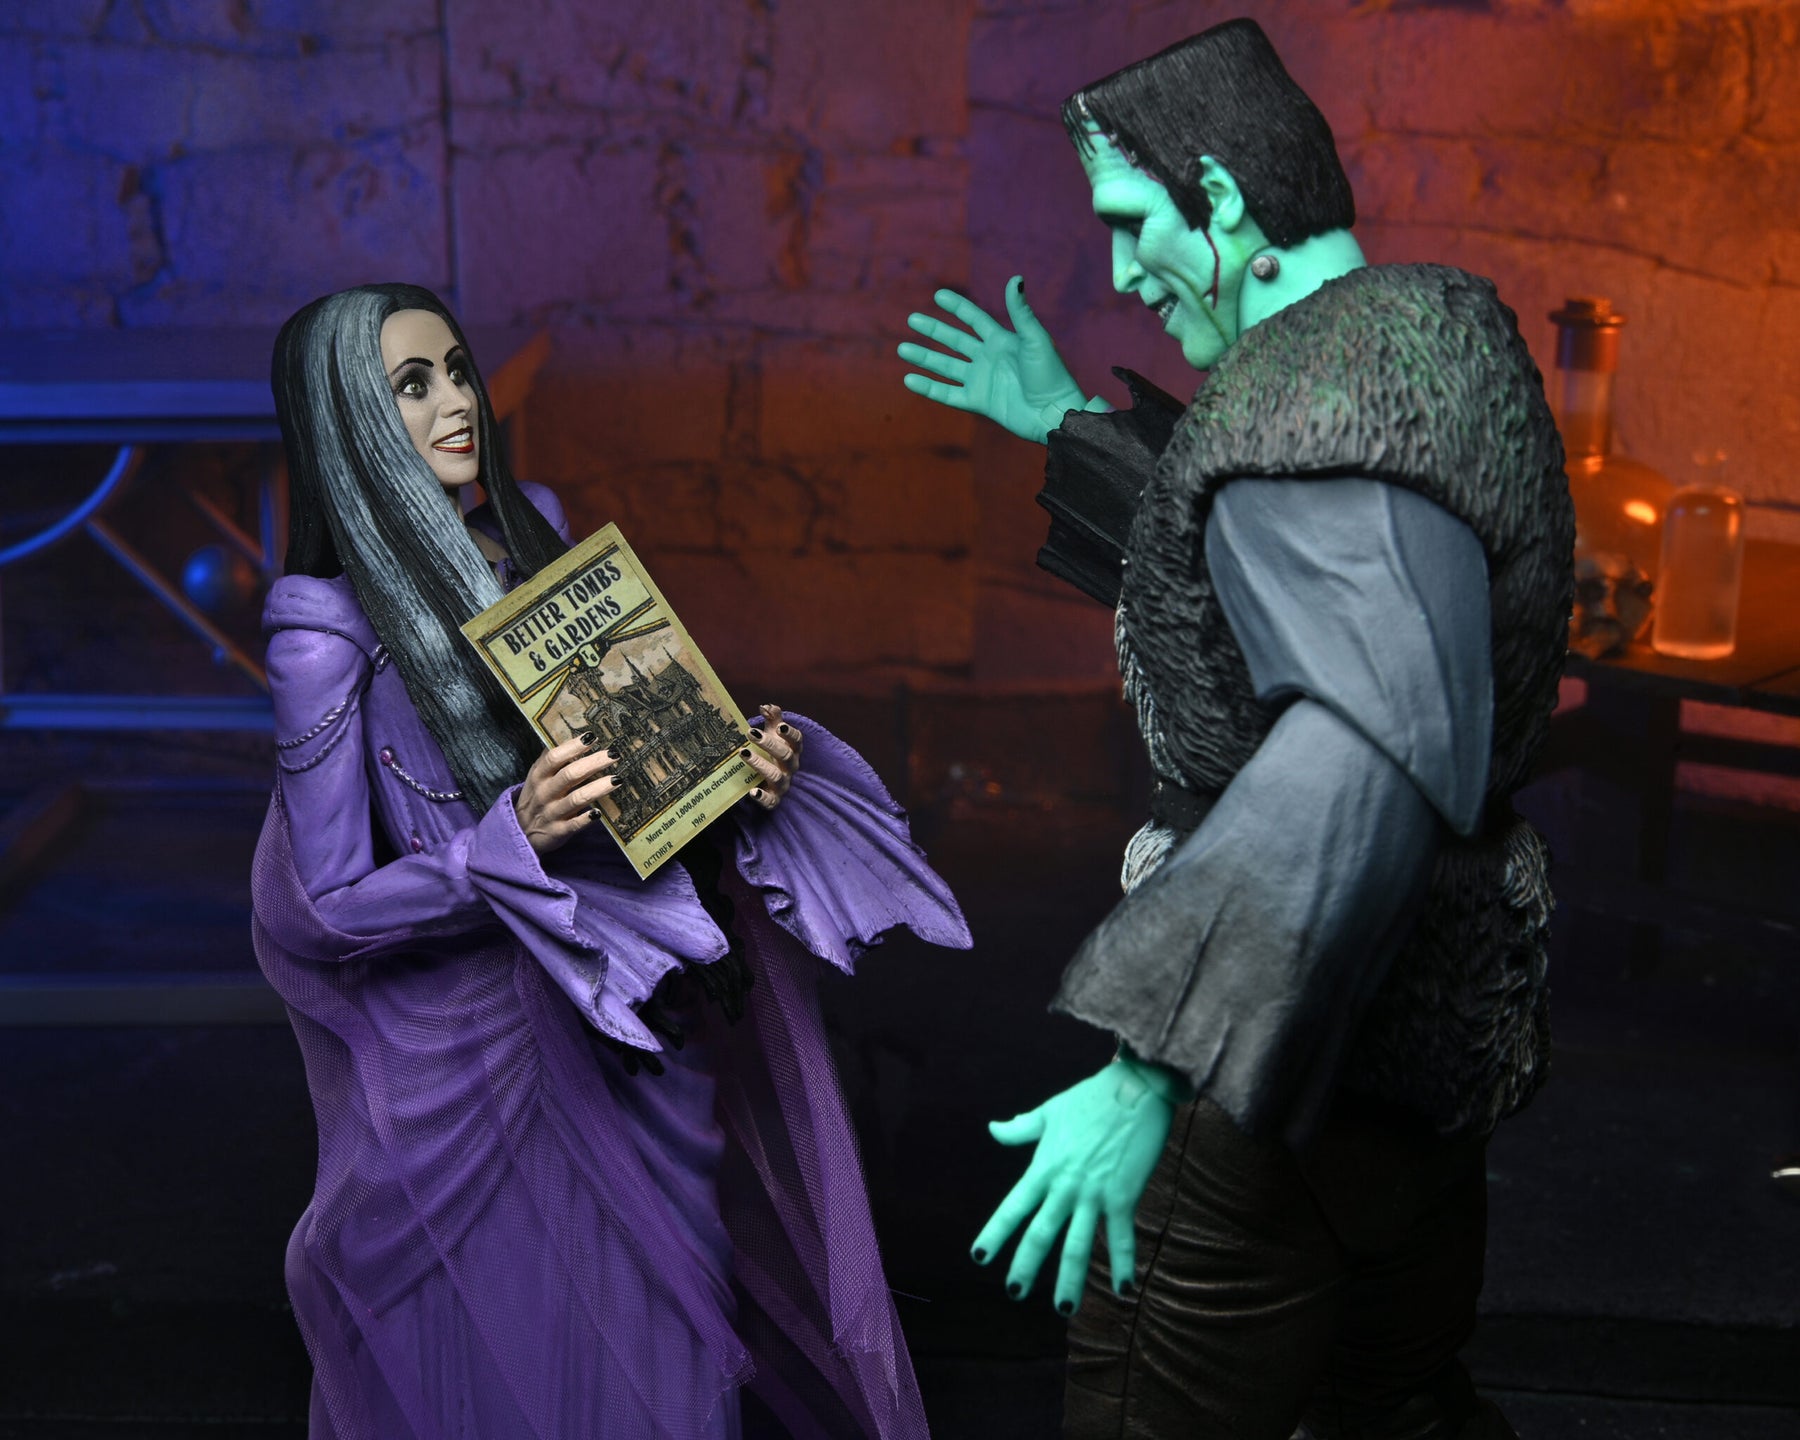 NECA - Rob Zombie’s The Munsters - Ultimate Lily Munster 7" Action Figure (Pre-Order Ships December)